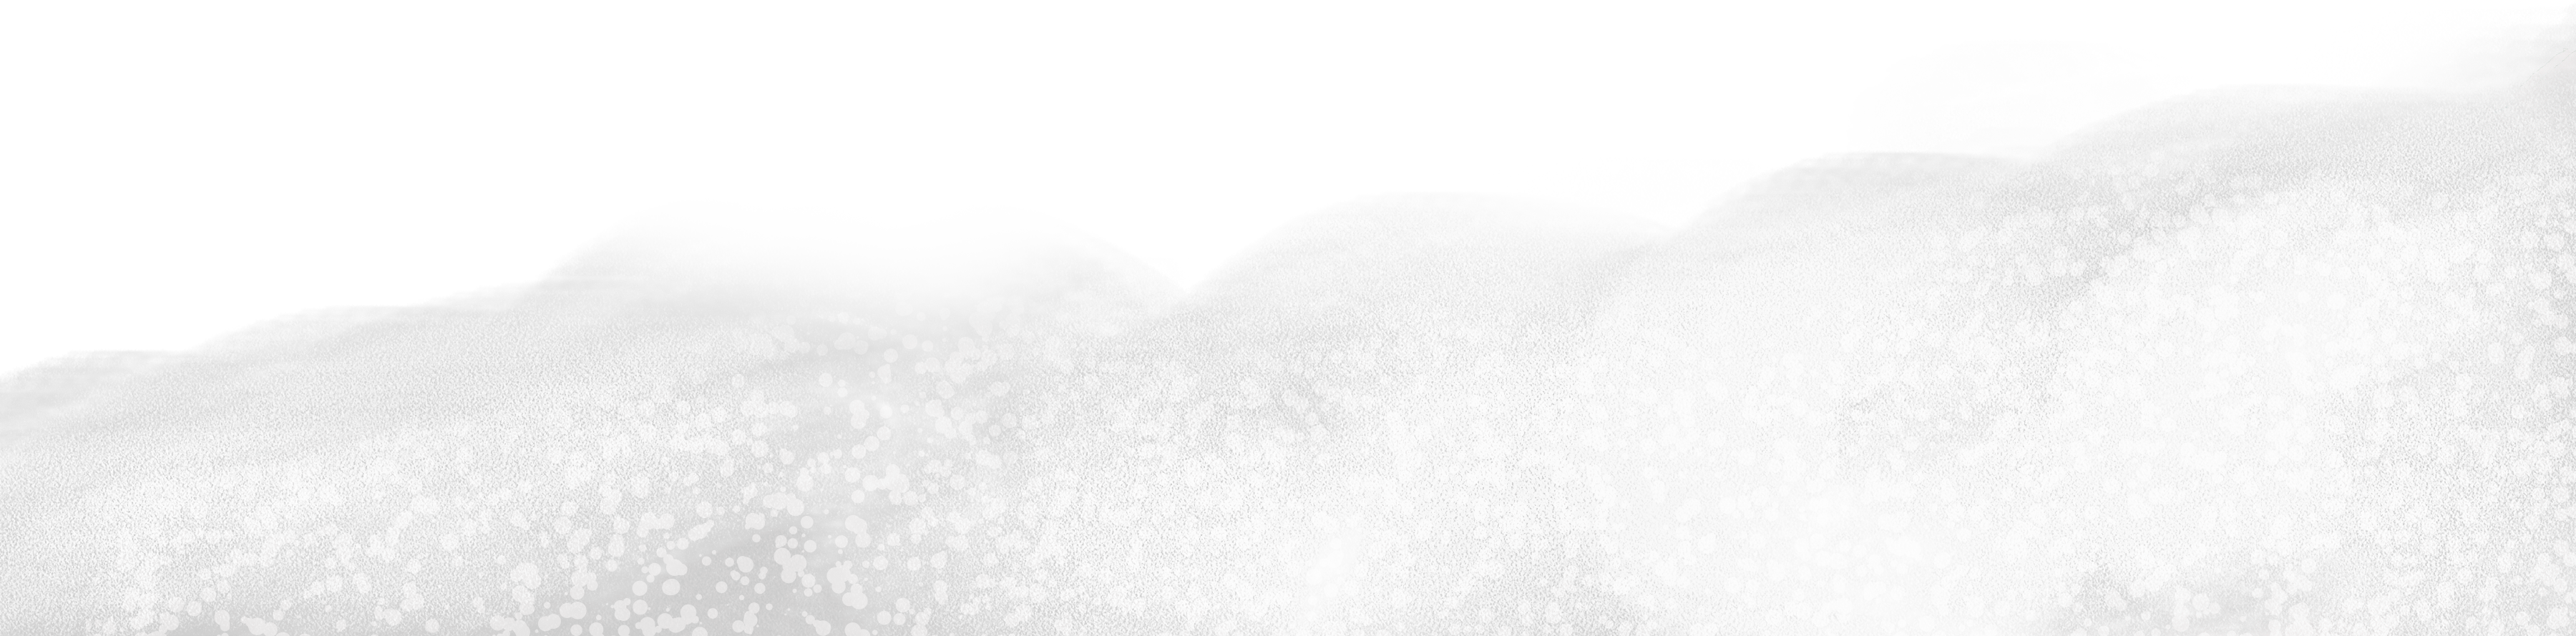 pile of snow png.